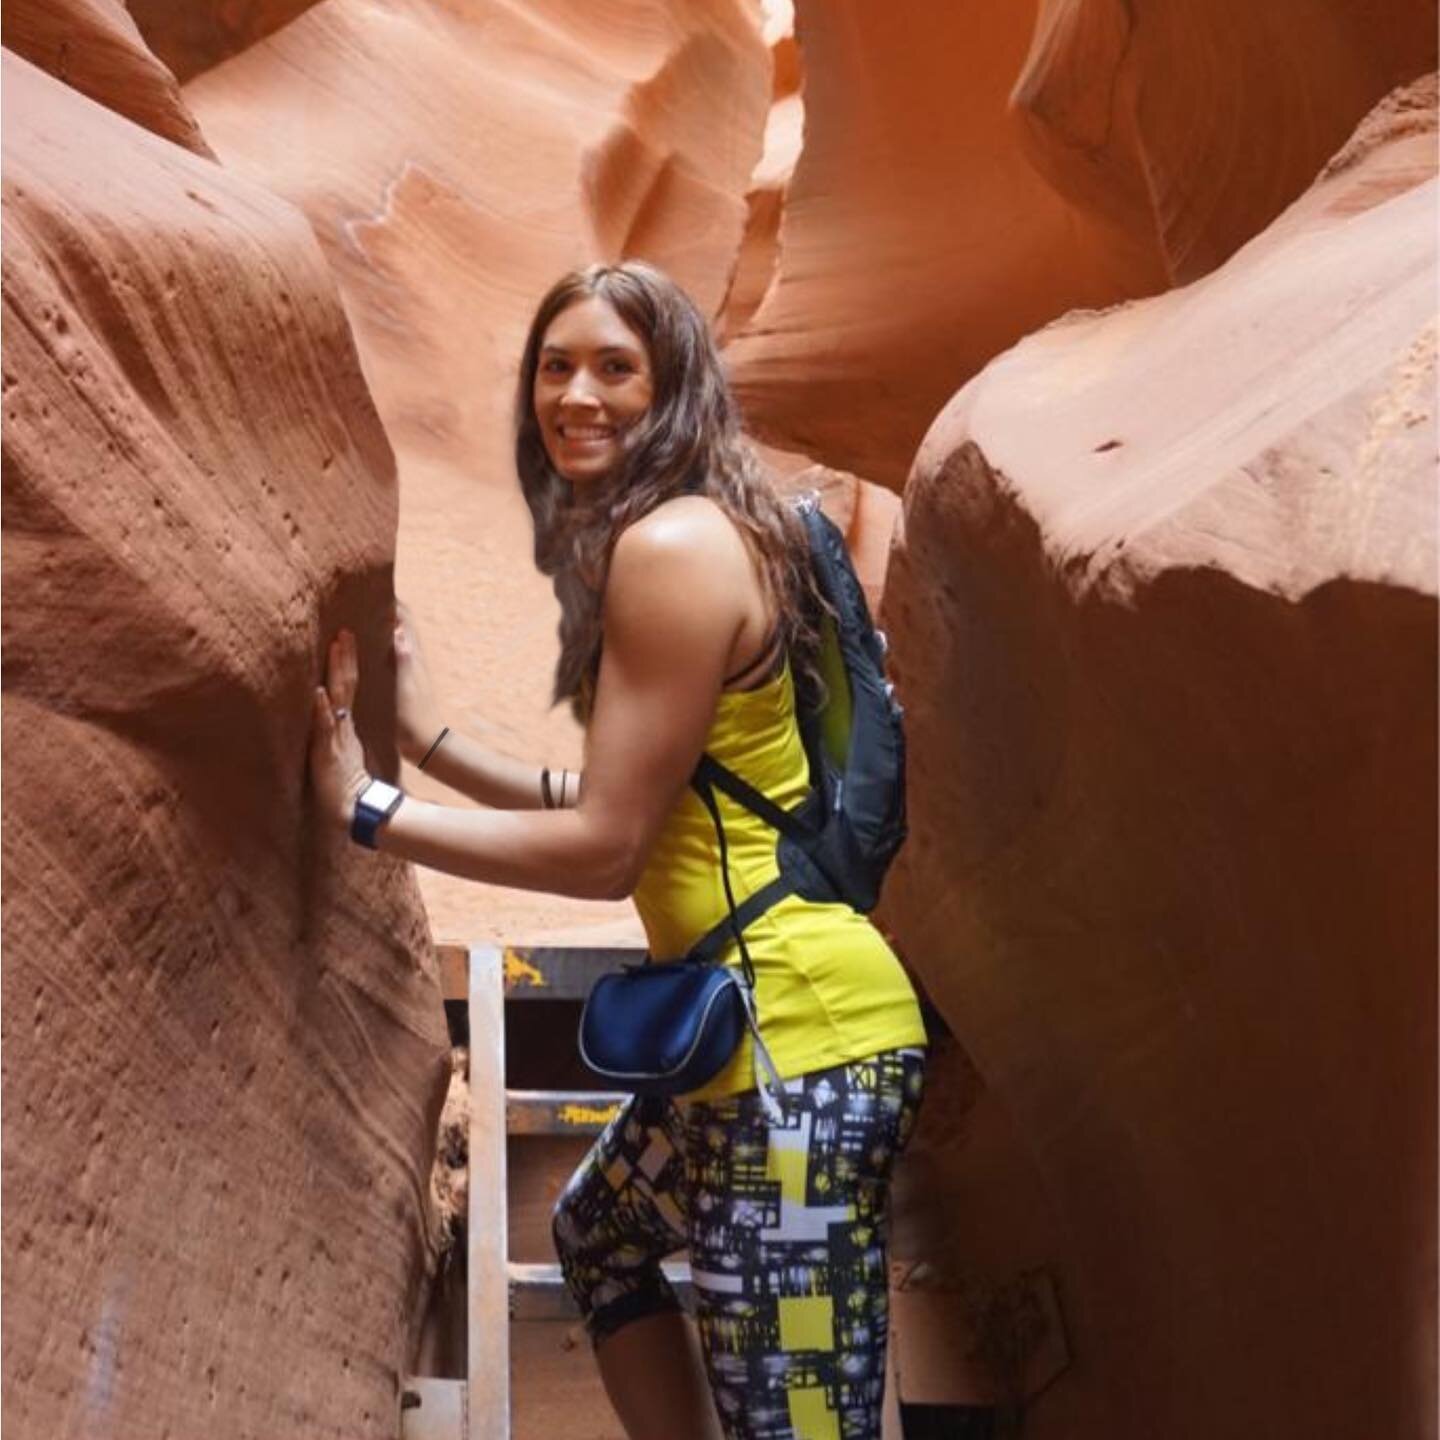 #tgif 
#antelopecanyon 
.
.
.
To see me as a patient in my ophthalmology clinic around Tampa Bay Area Florida please call 727-372-1311.
.
.
.
If you are planning to do an aesthetic procedure at my medical spa please call 727-777-2640.
.
.
.
Dr. Tanya